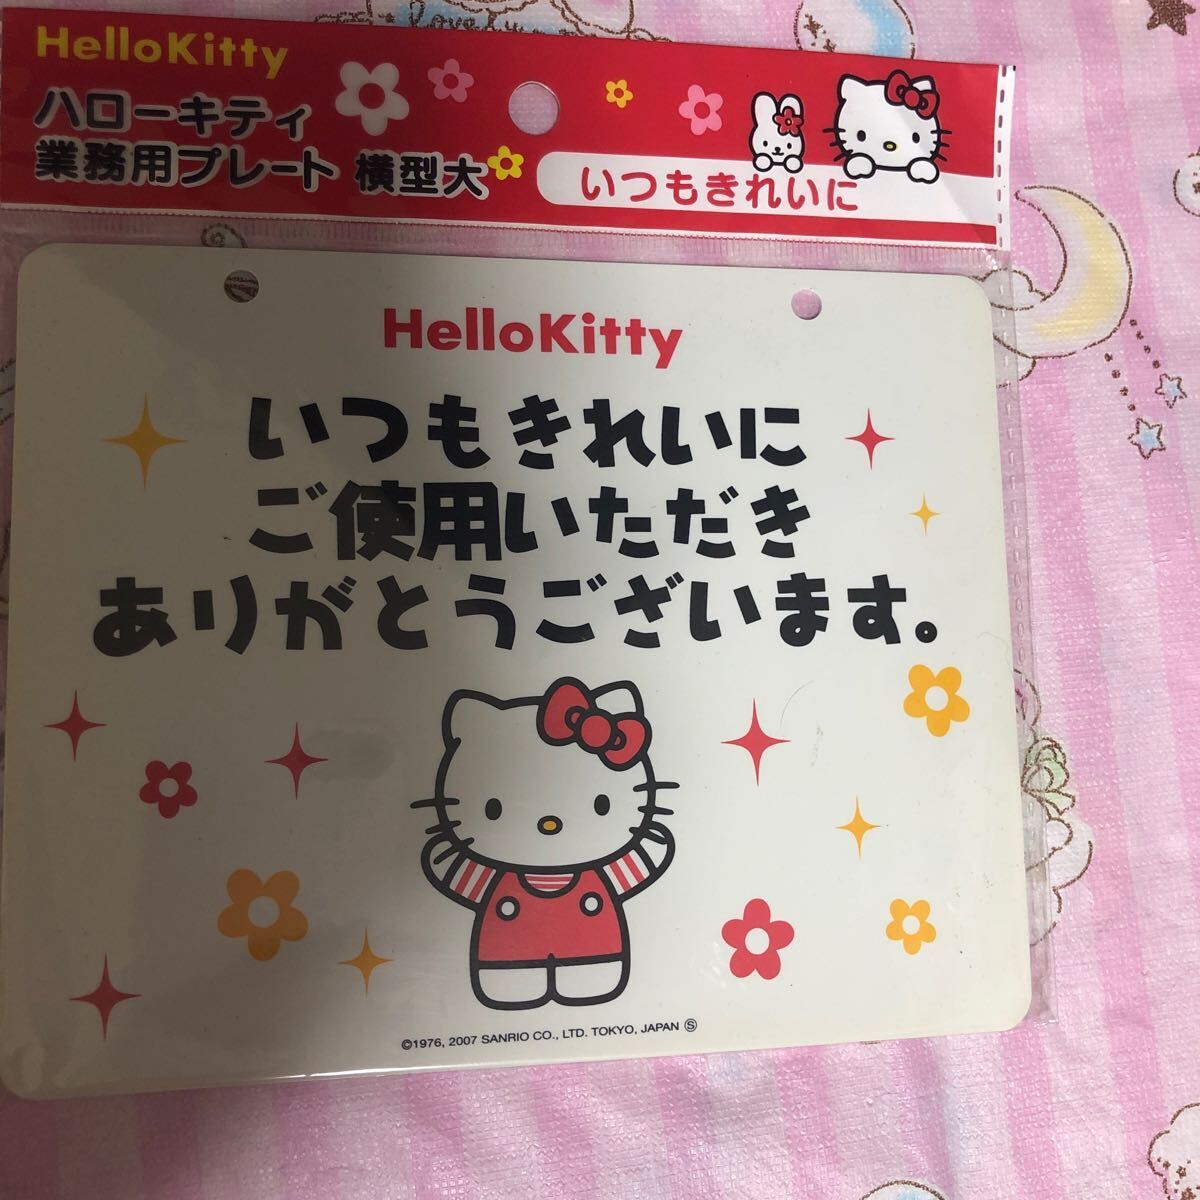  Hello Kitty business use plate signboard . shop izakaya pub lucky bag lovely total 7 sheets 